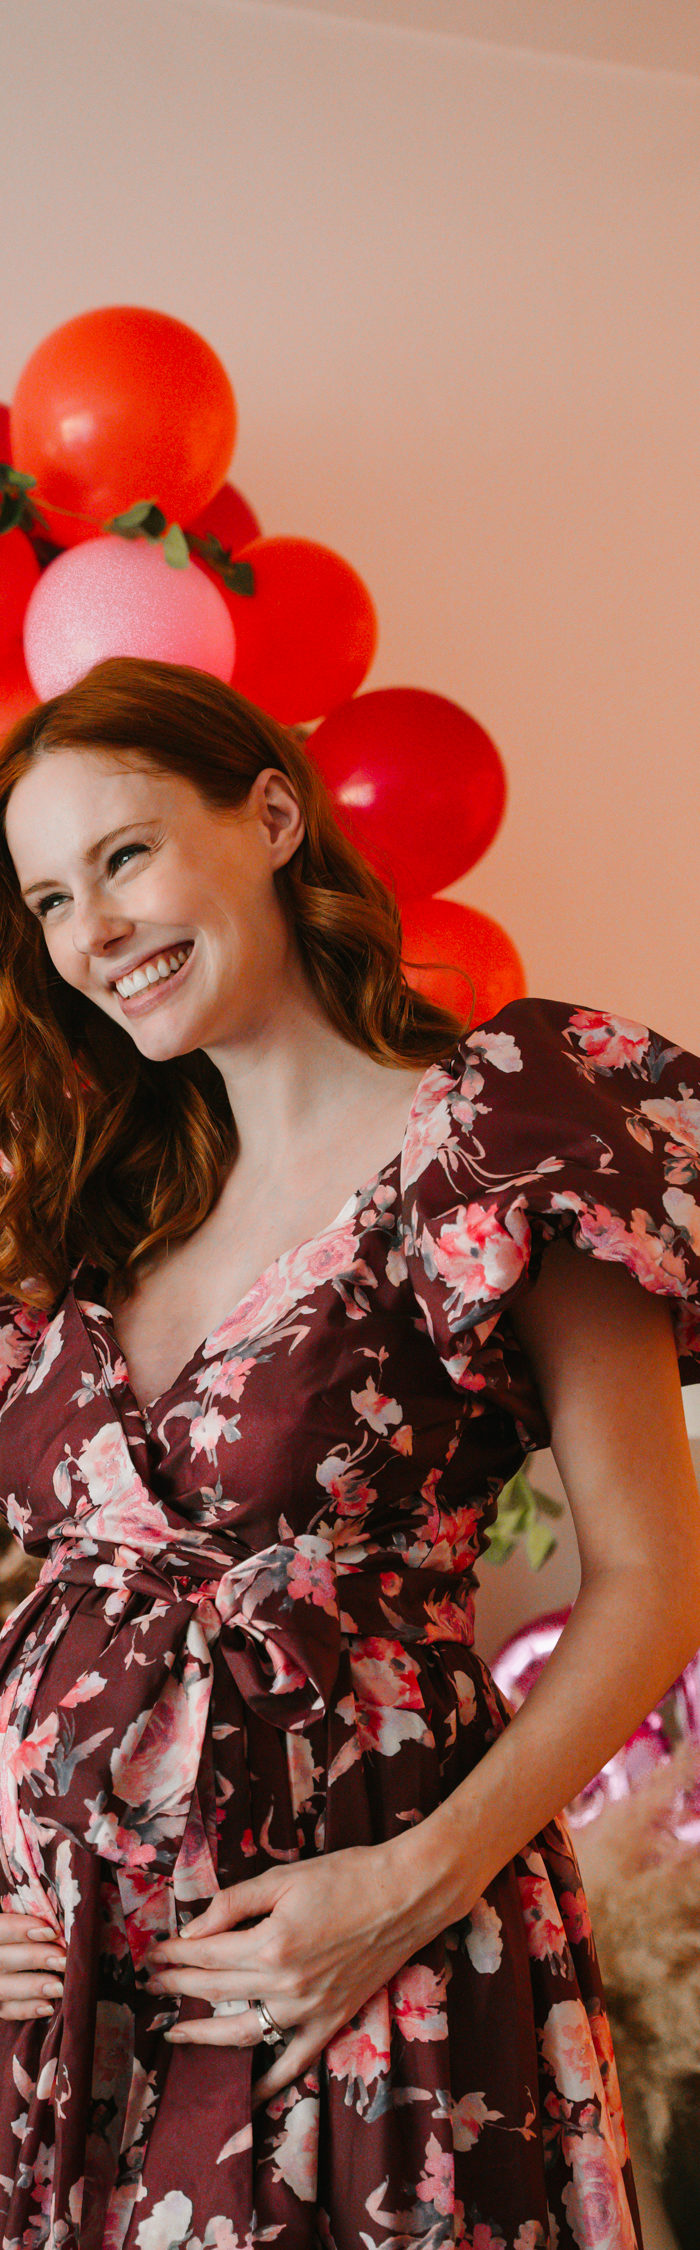 Miss USA 2011 Alyssa Campanella of The A List blog shares her dreamy virtual baby shower